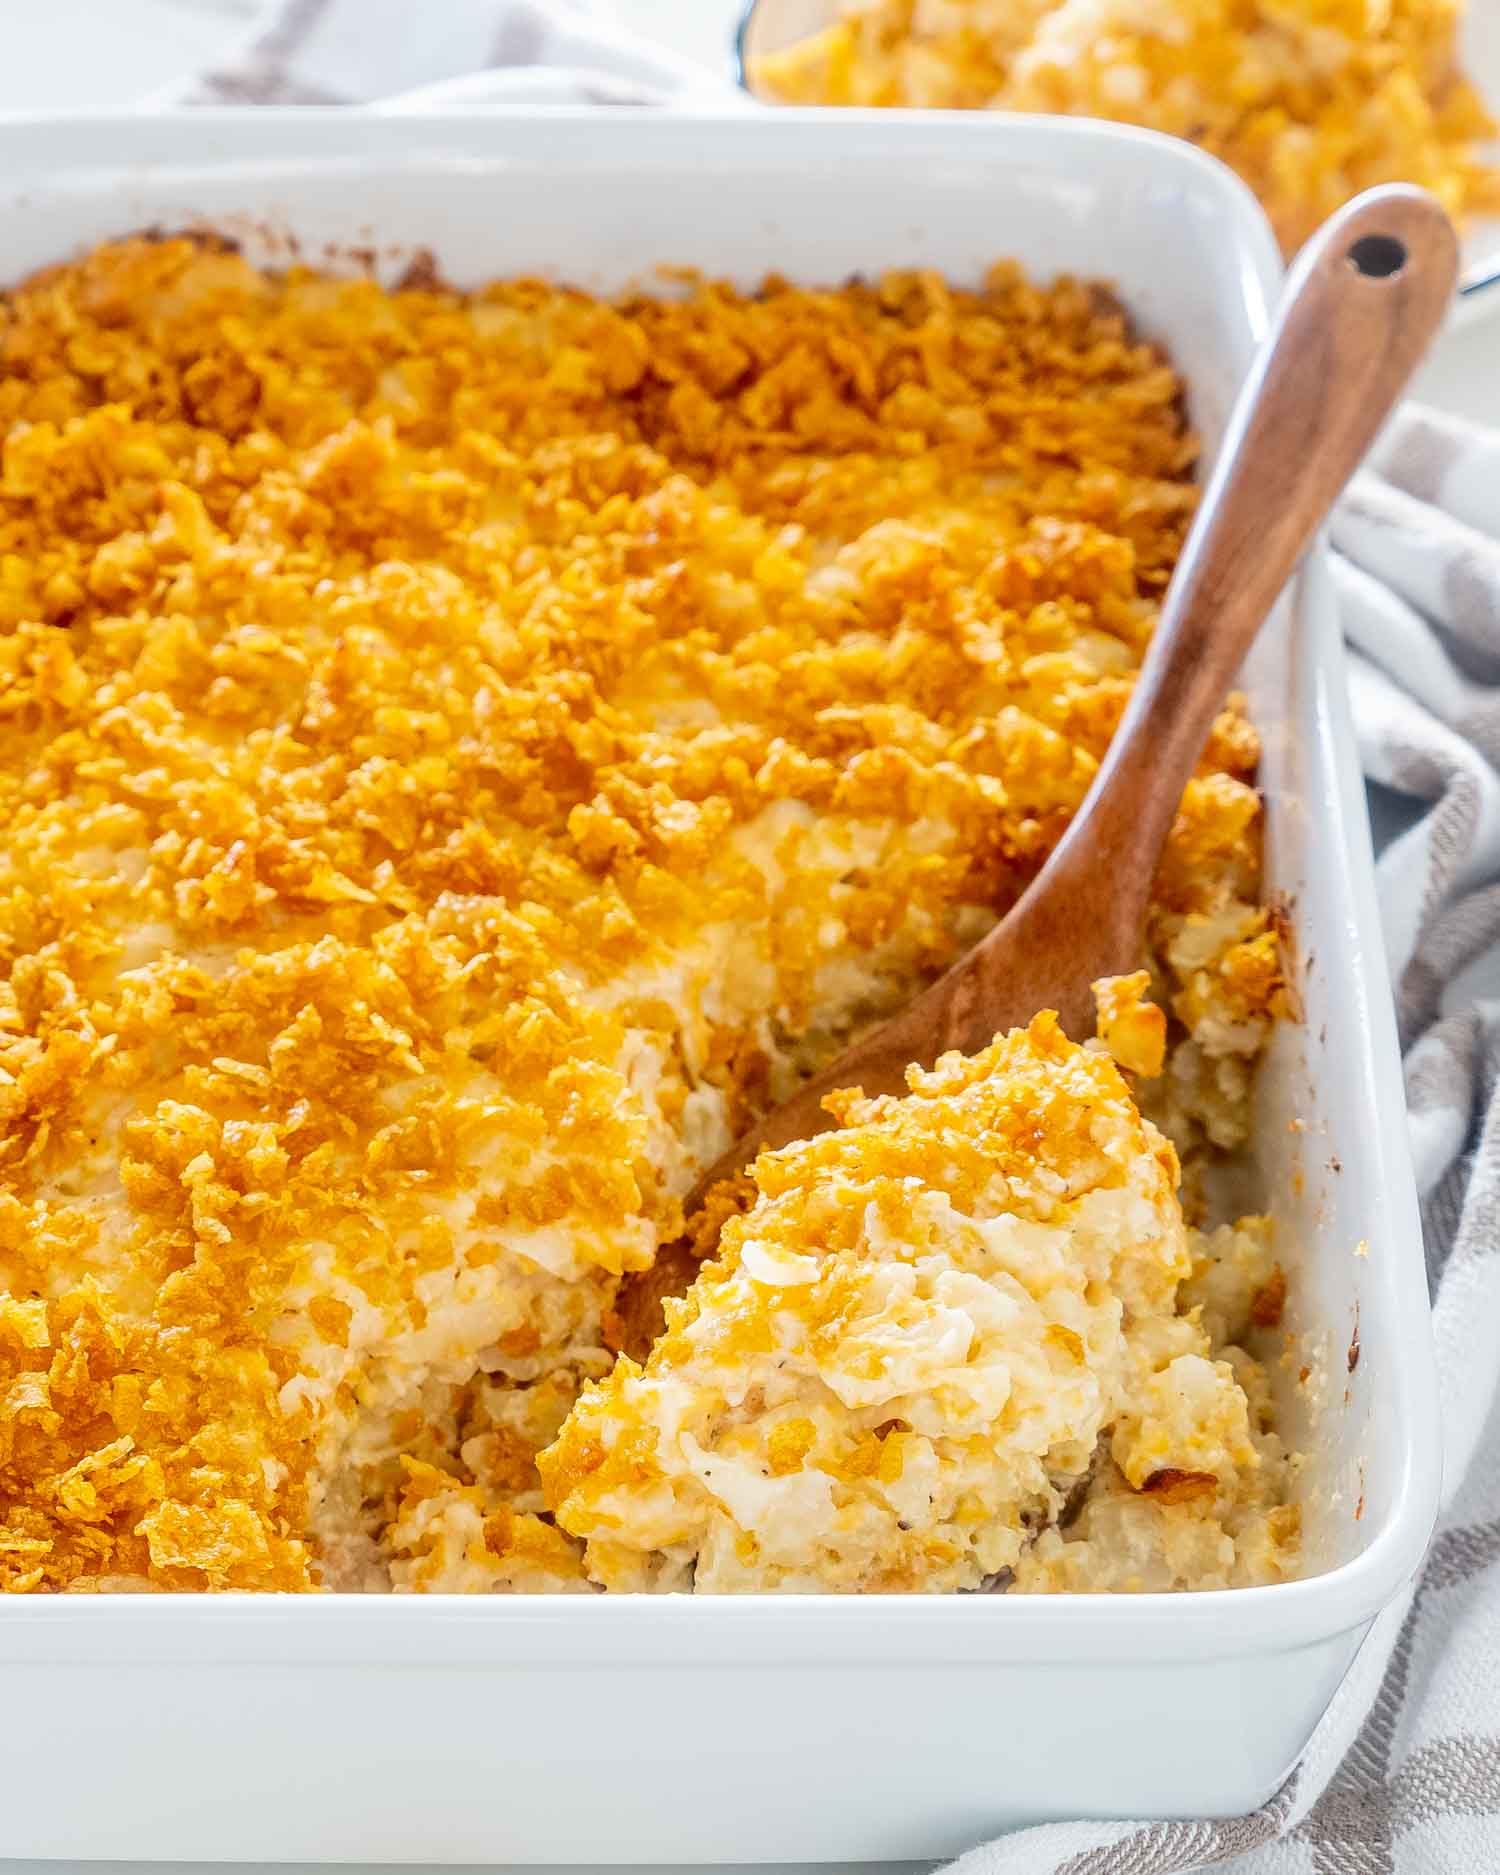 funeral potatoes freshly baked in a casserole dish with a wooden serving spoon inside.